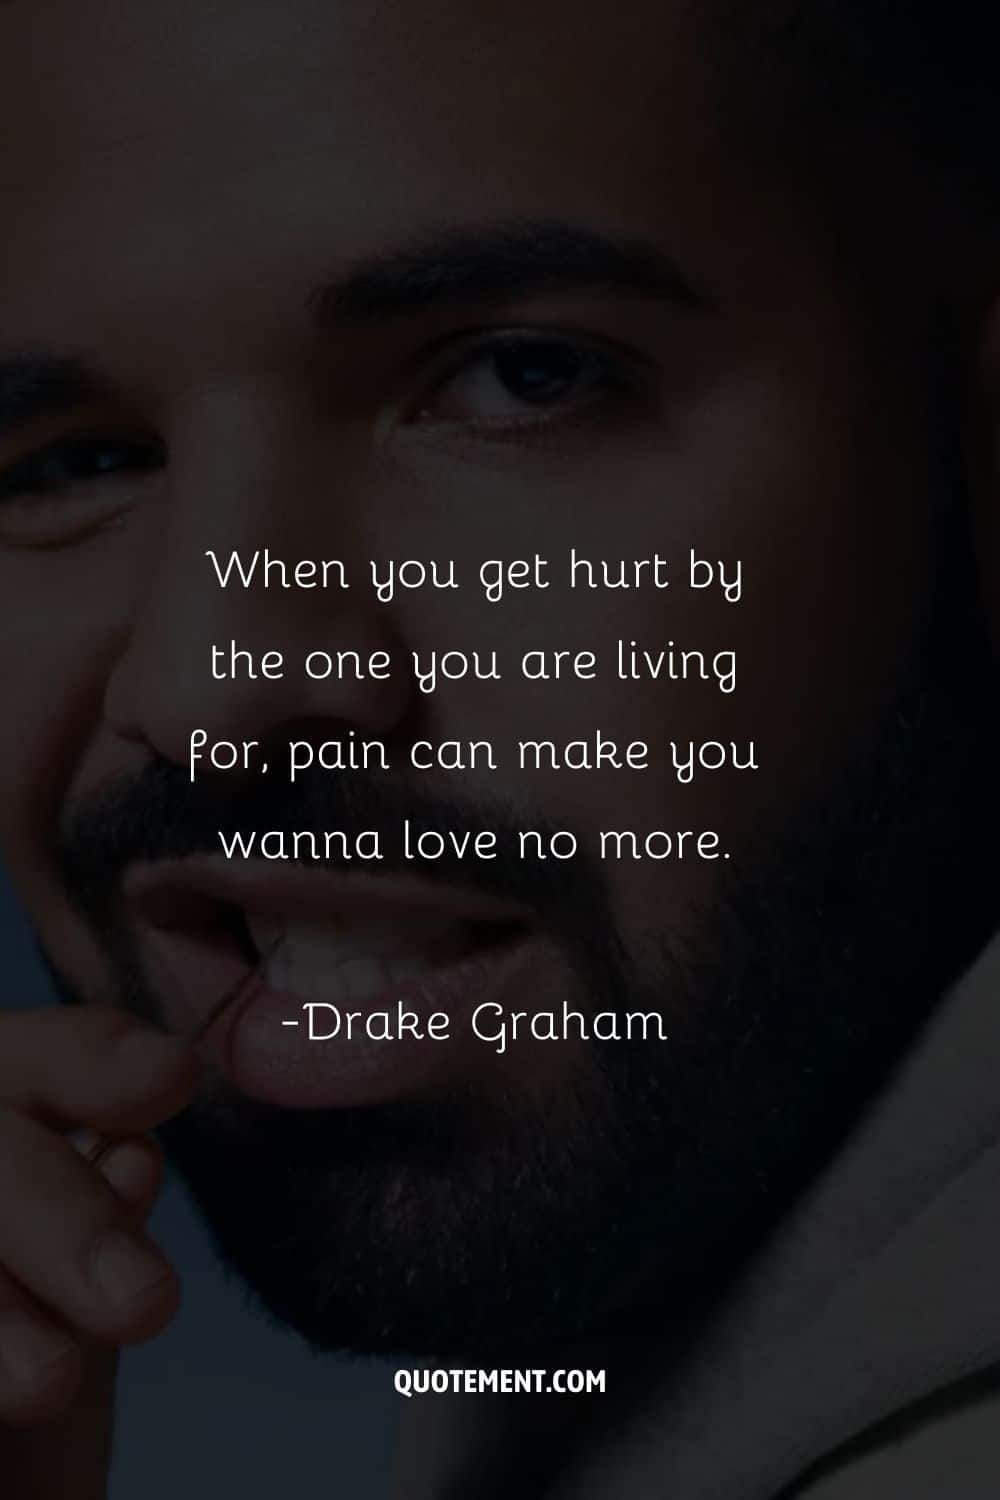 When you get hurt by the one you are living for, pain can make you wanna love no more.